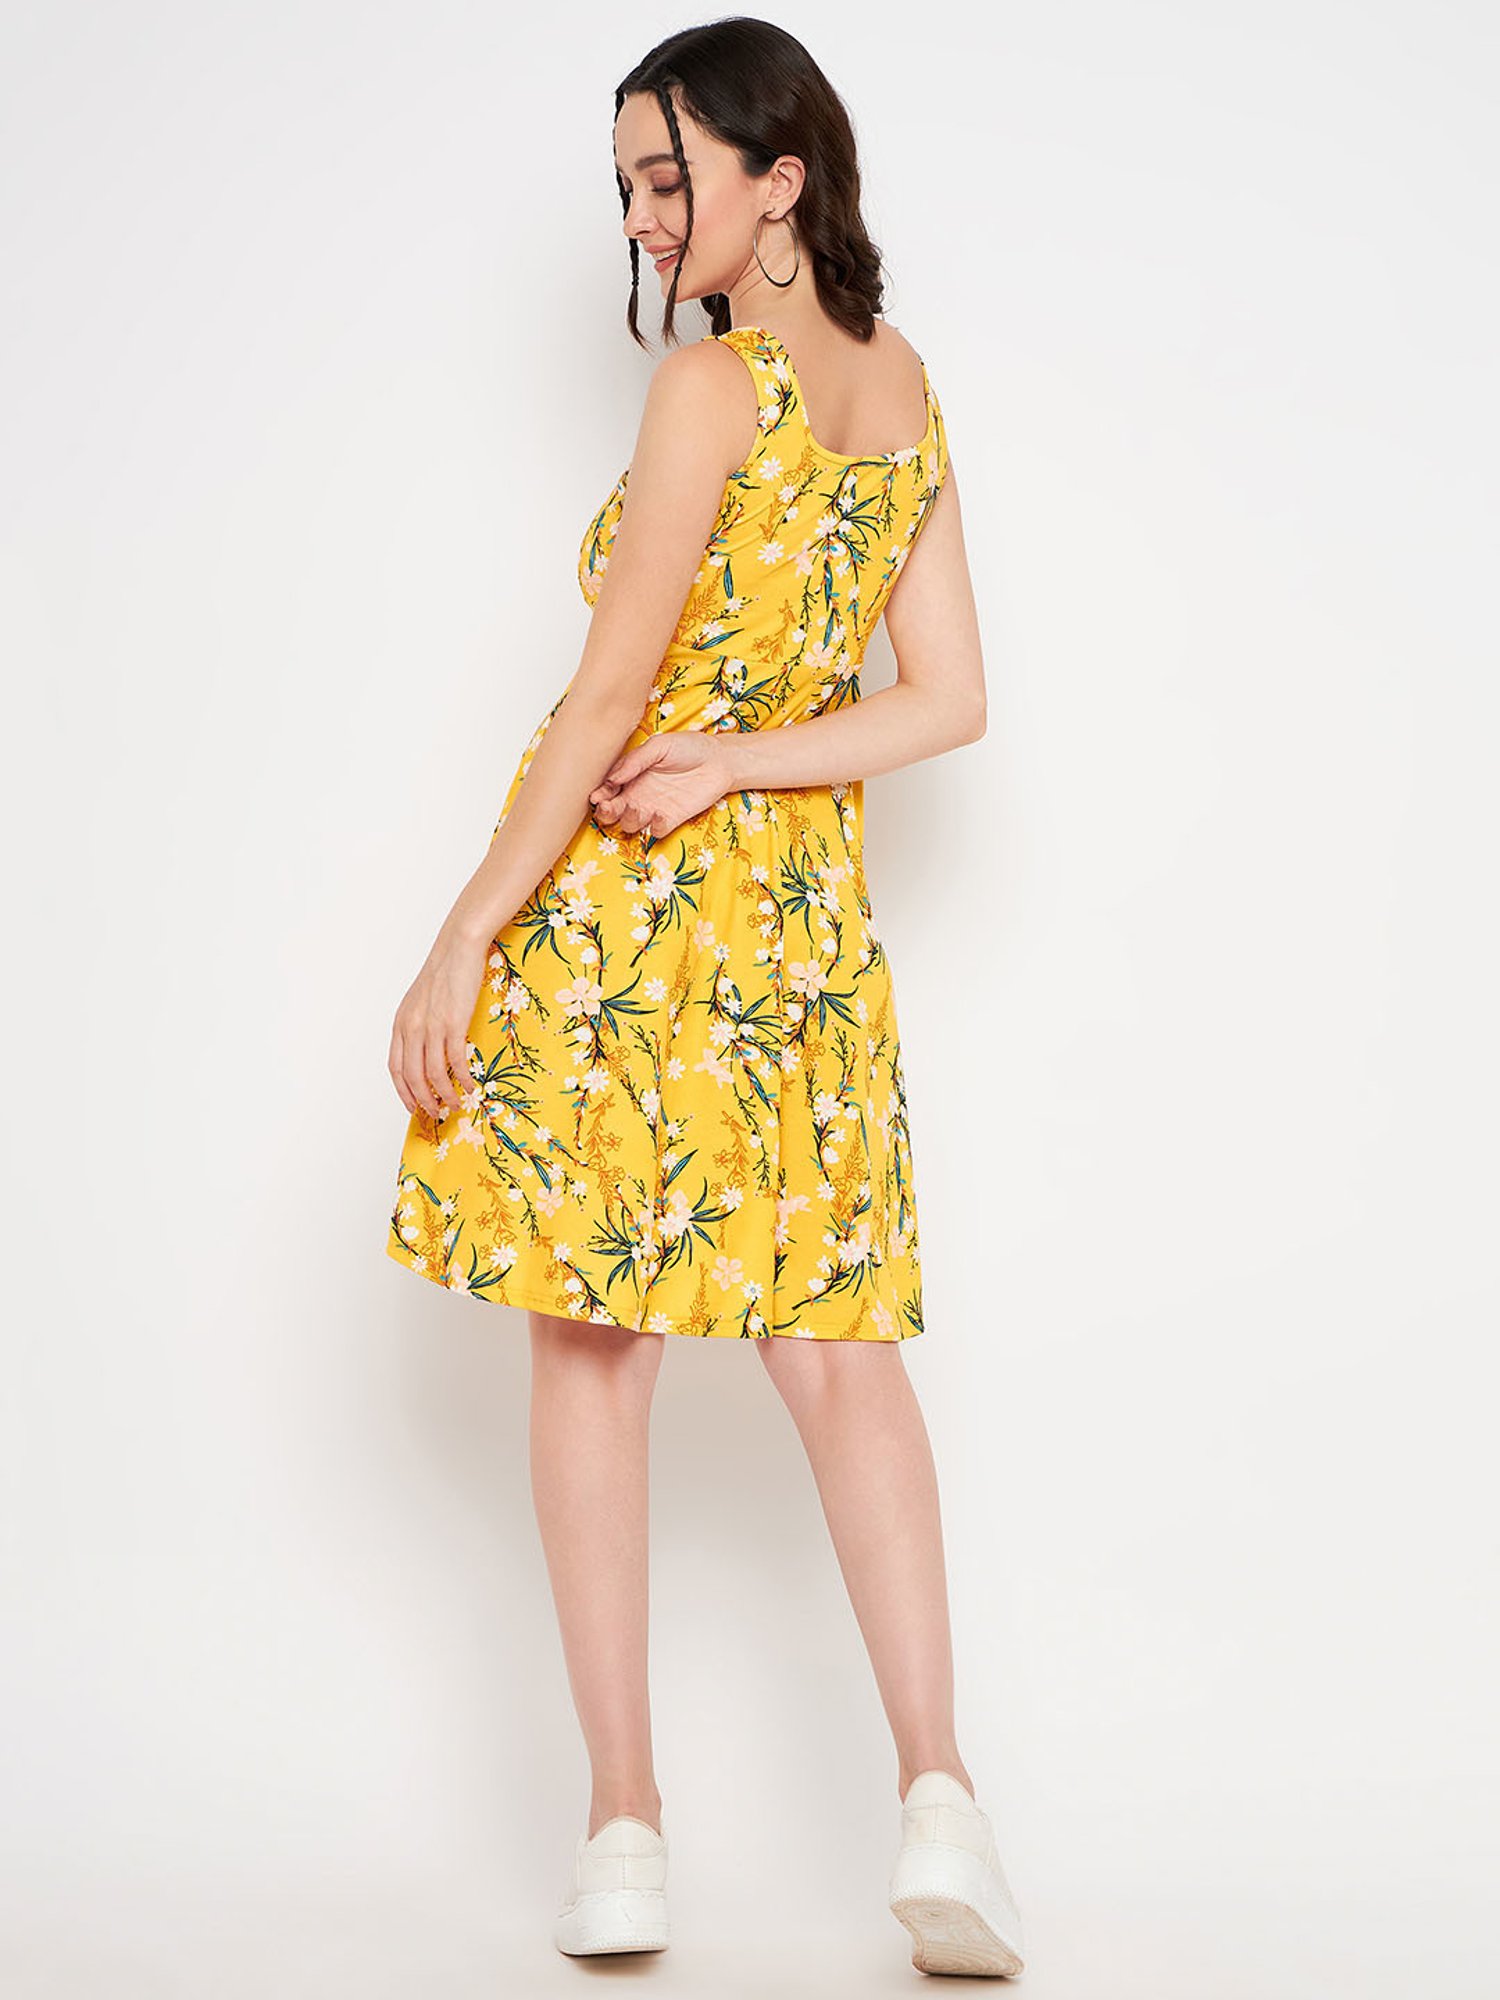 Floral Yellow Dress With Adjustable Straps